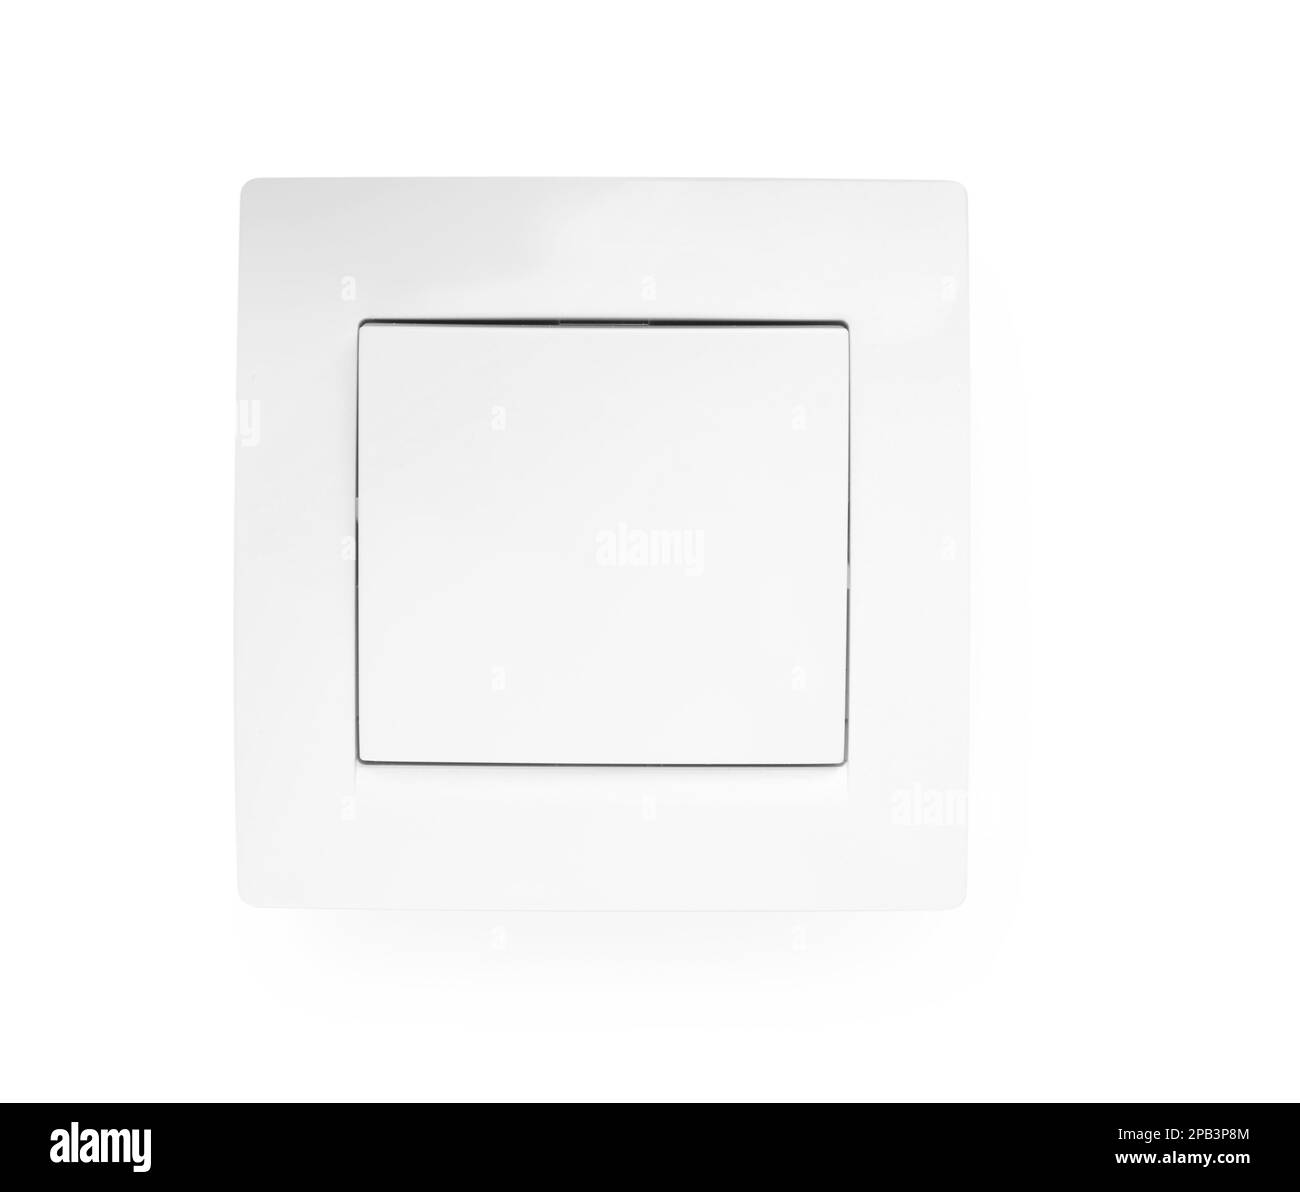 Modern plastic light switch isolated on white Stock Photo